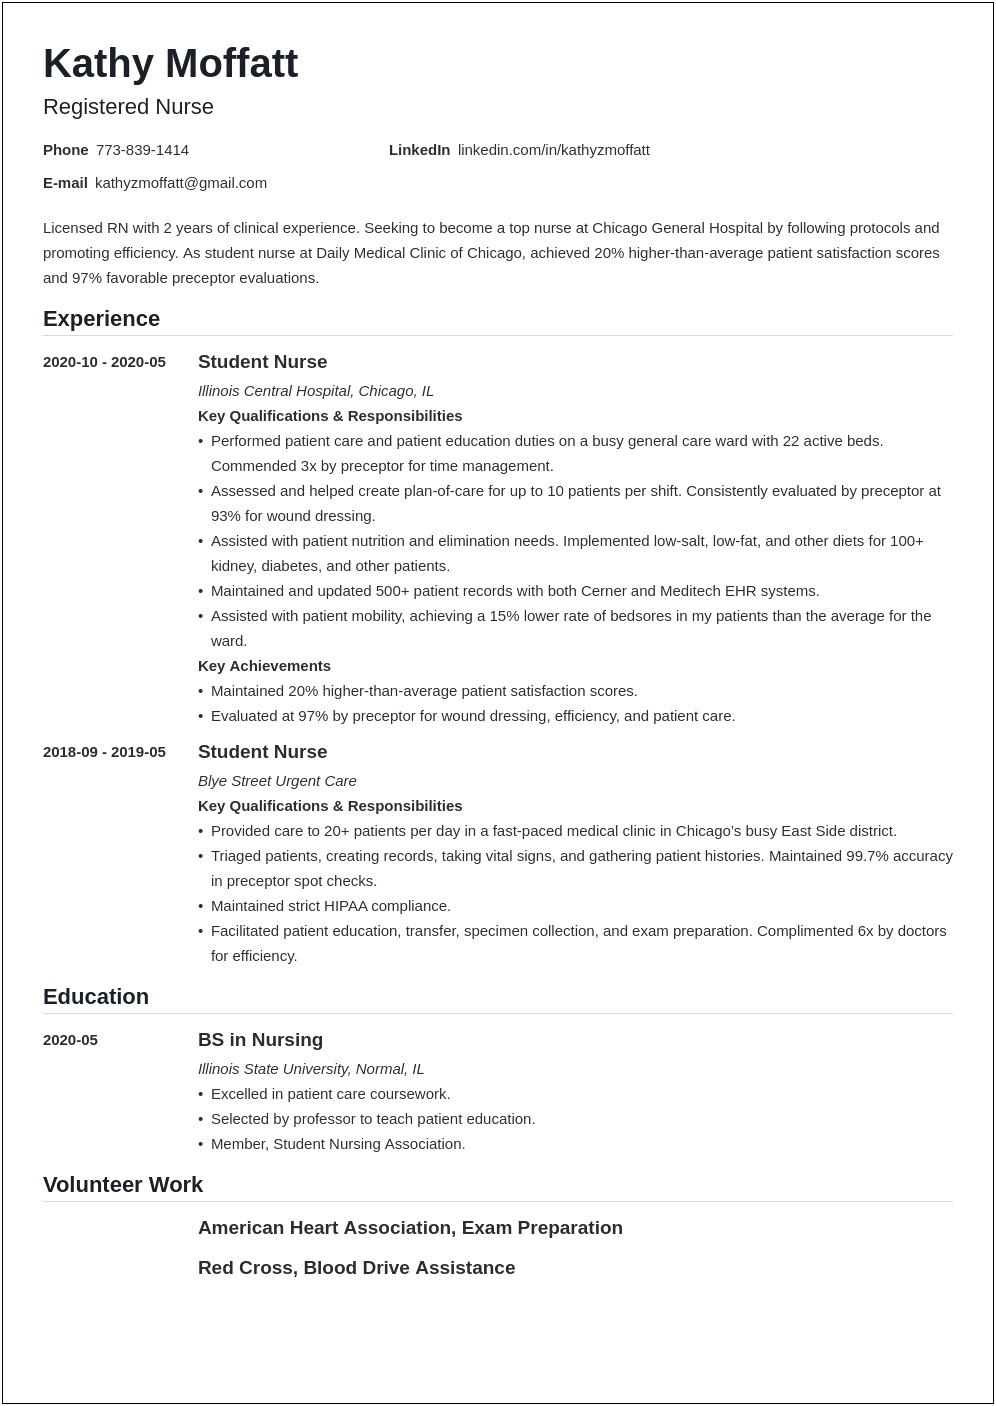 Resume Template Examples For A Registered Nurse